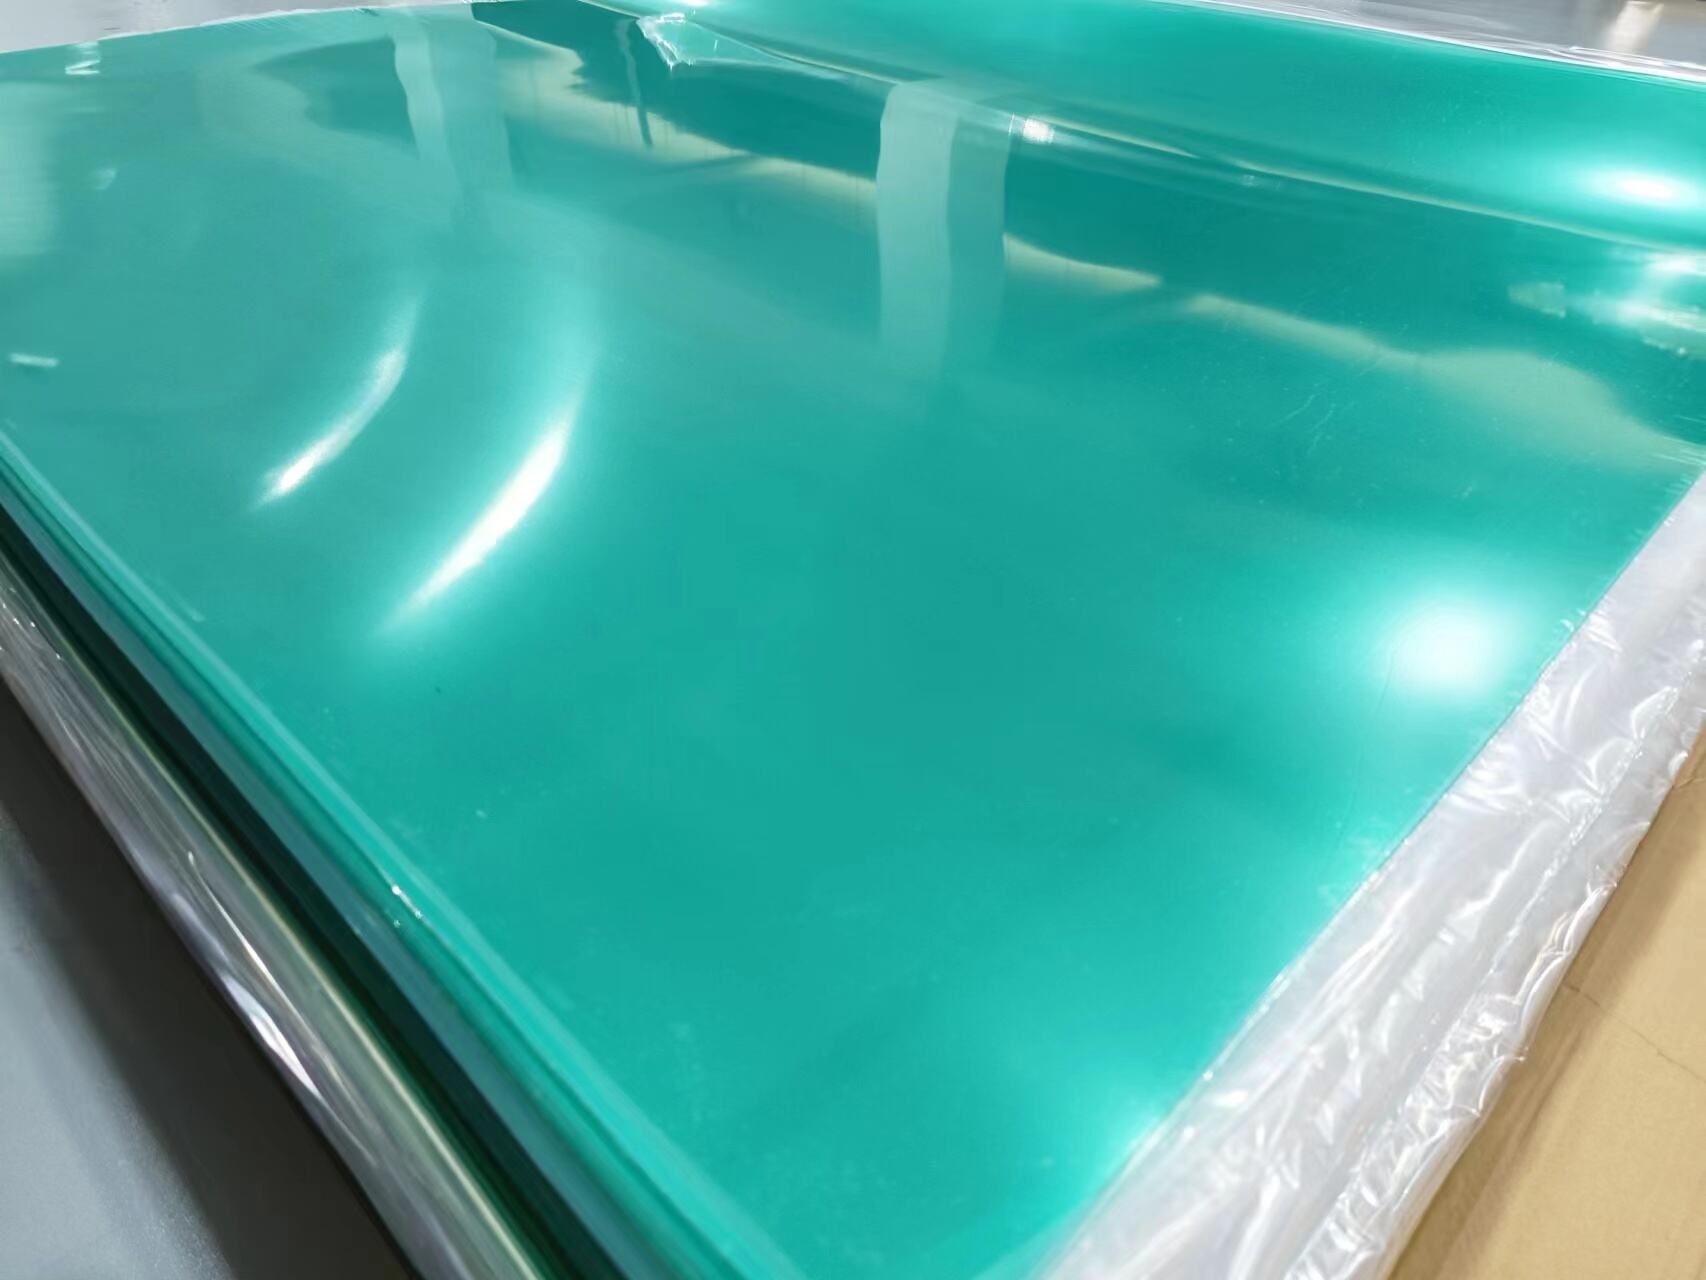 Andisco High Quality 5mm ESD Anti-Static PMMA Acrylic Sheet Plastic Panels Offering Cutting and Moulding Processing Services details